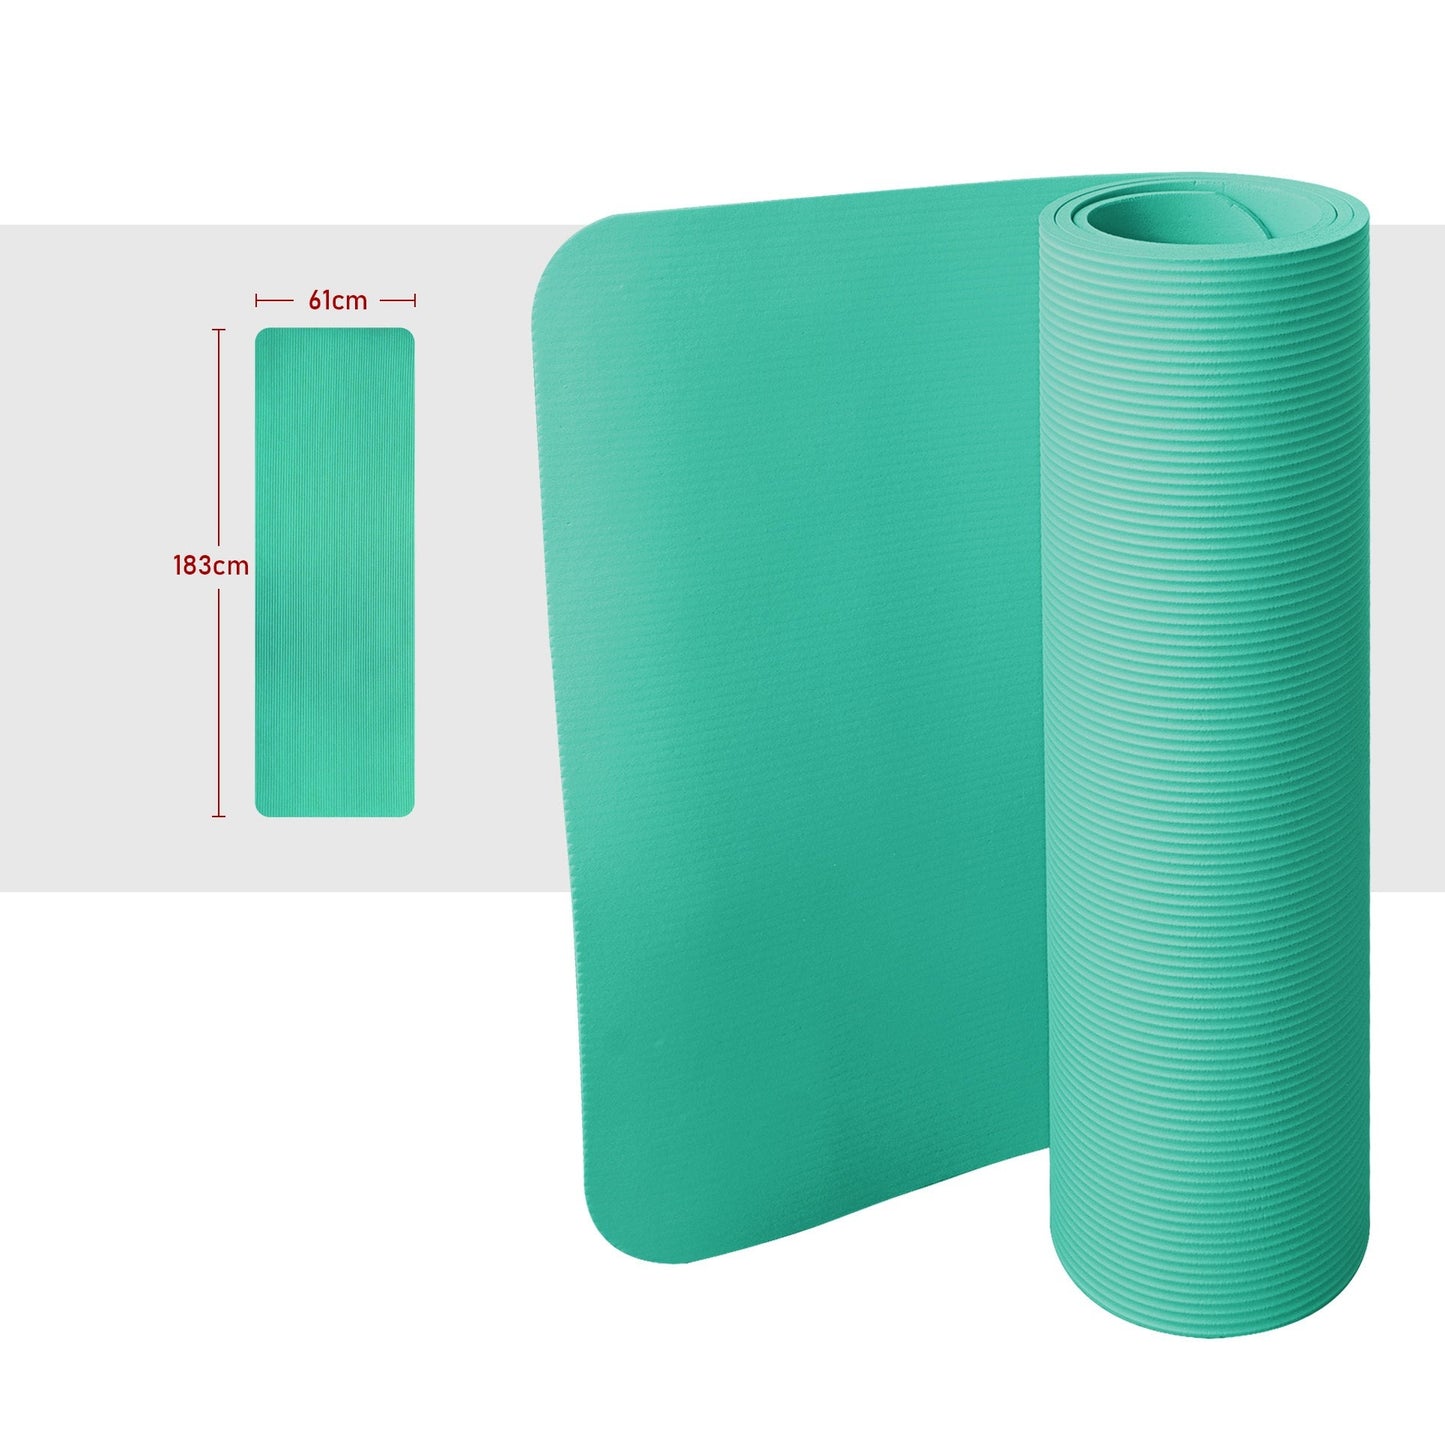 Yoga Mat with Carrying Strap - Green